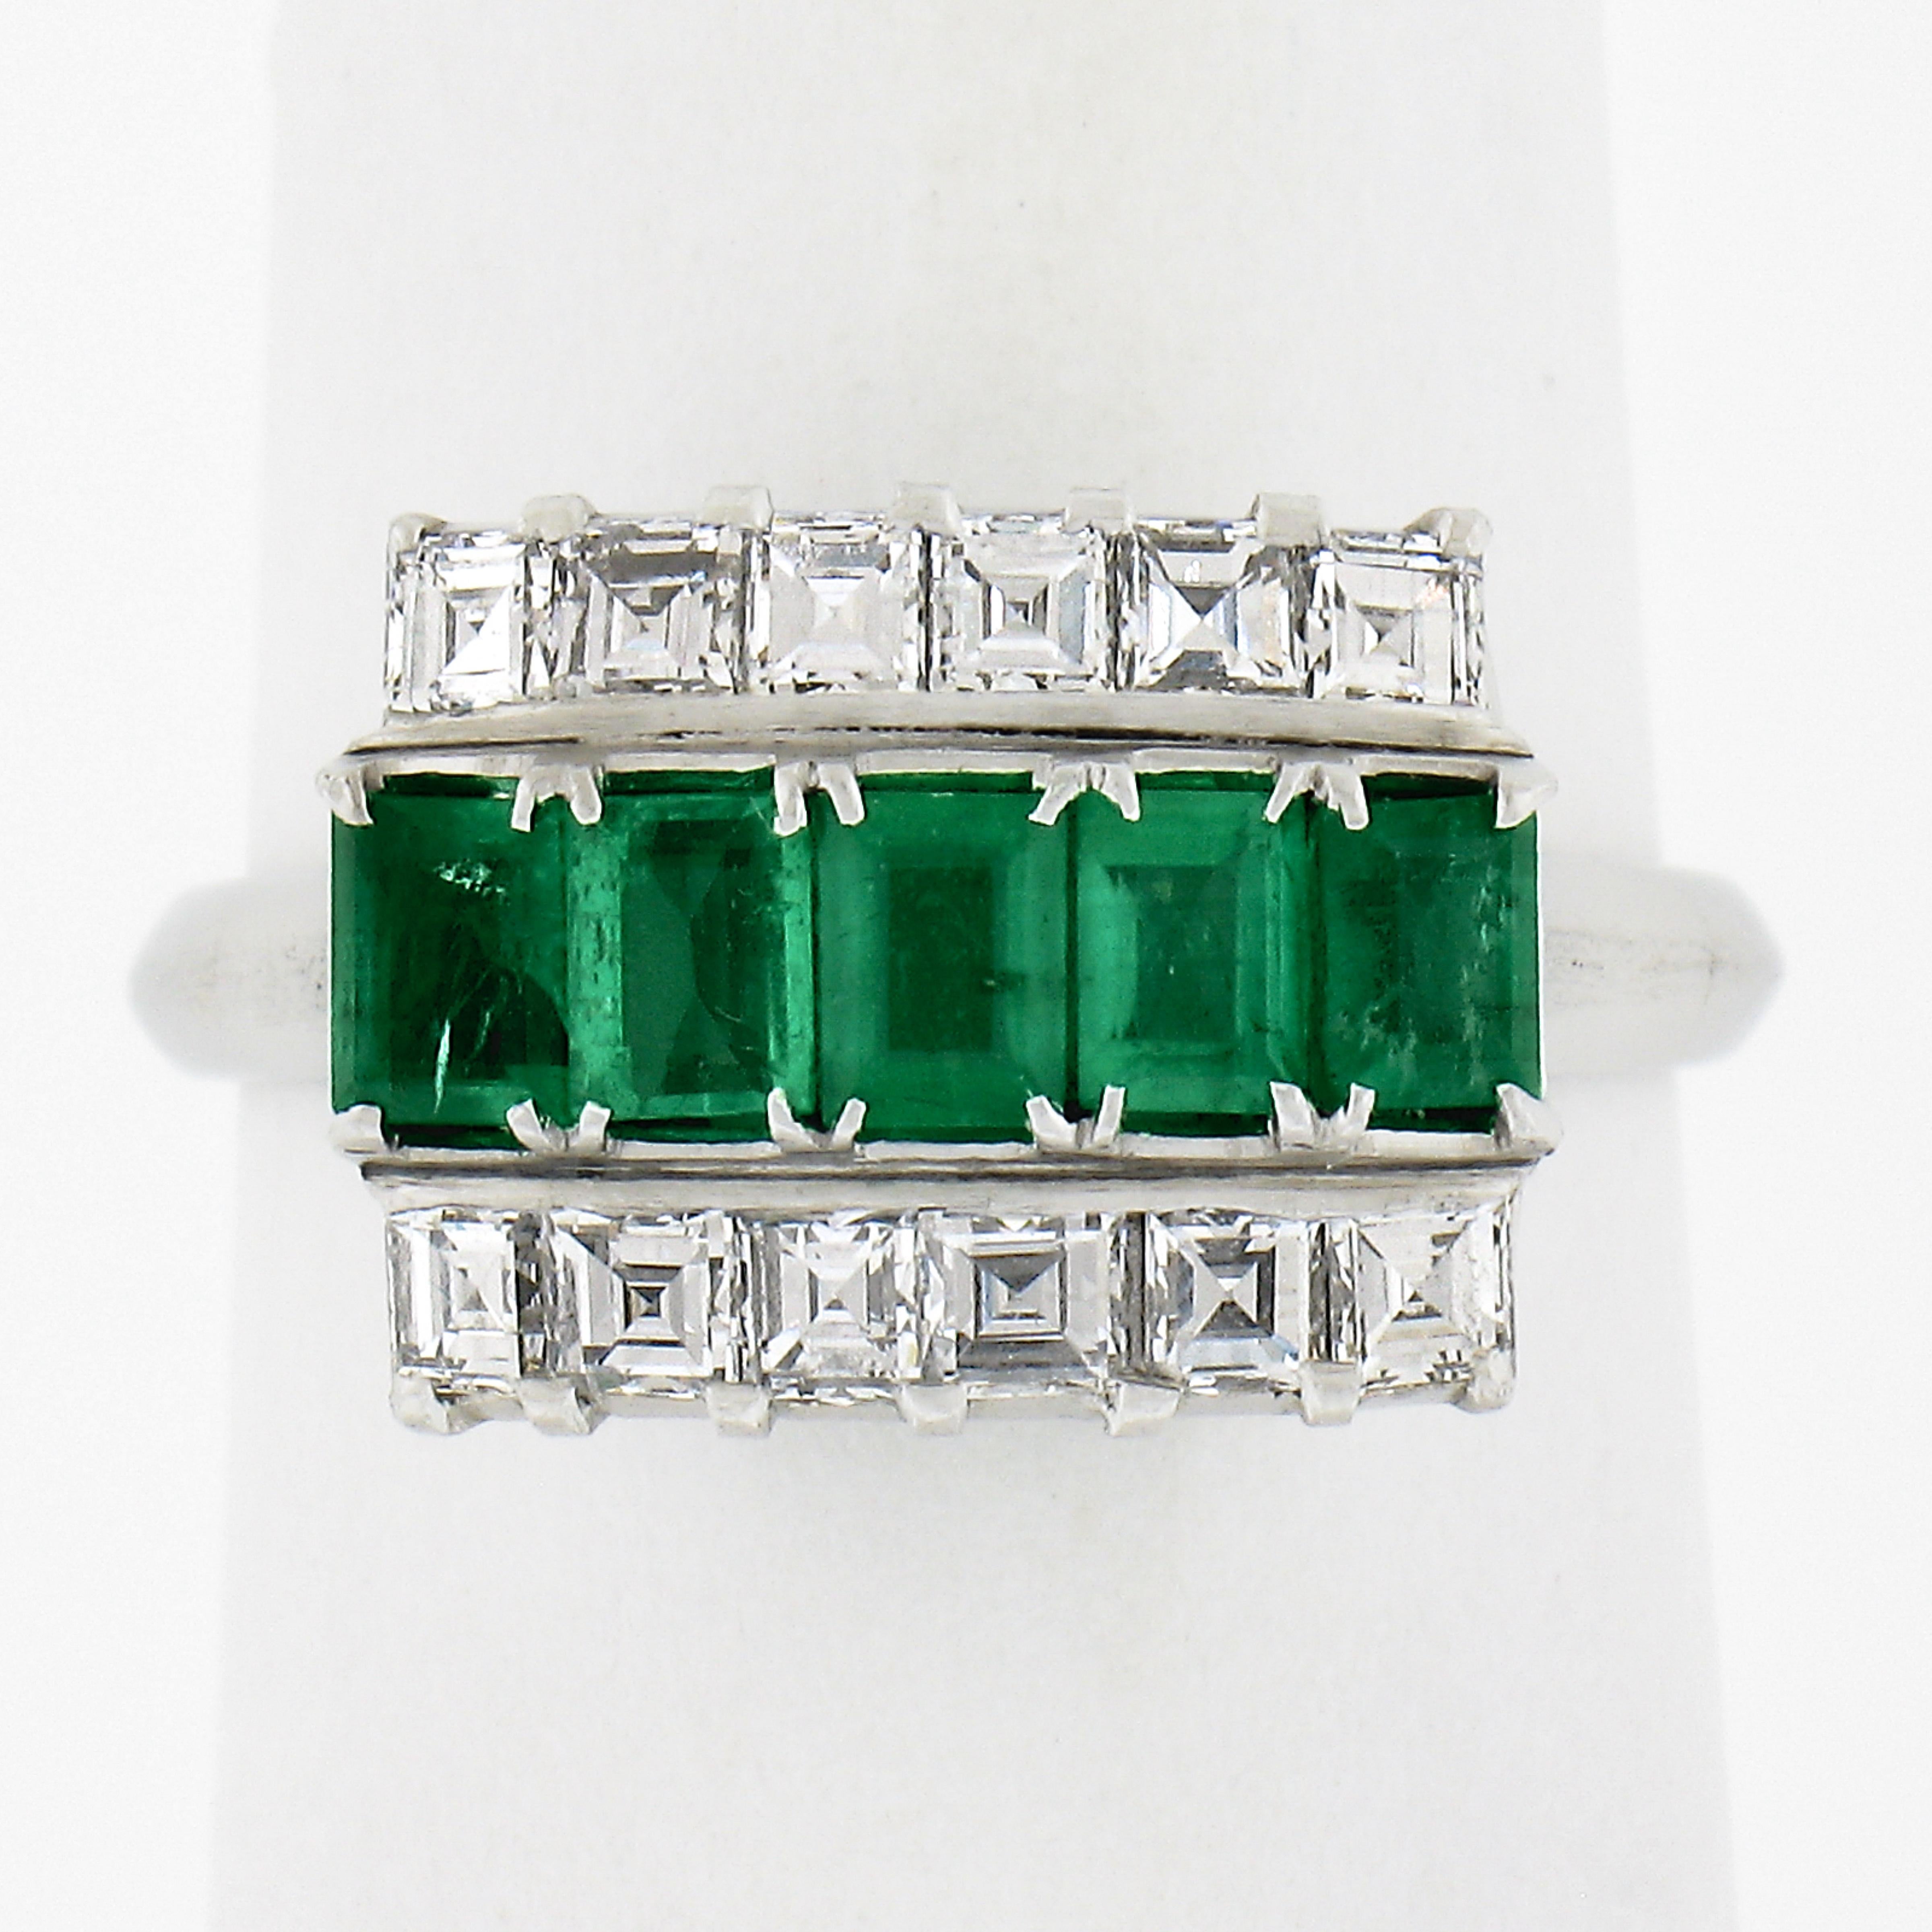 --Stone(s):--
(12) Natural Genuine Diamonds - Square Step Cut - Prong Set - F/G Color - VS1/VS2 Clarity - 0.64ctw (exact - stamped)
(5) Natural Genuine Emeralds - Rectangular Cut - Prong Set - Green Color - 0.73ctw (exact - stamped)
Total Carat